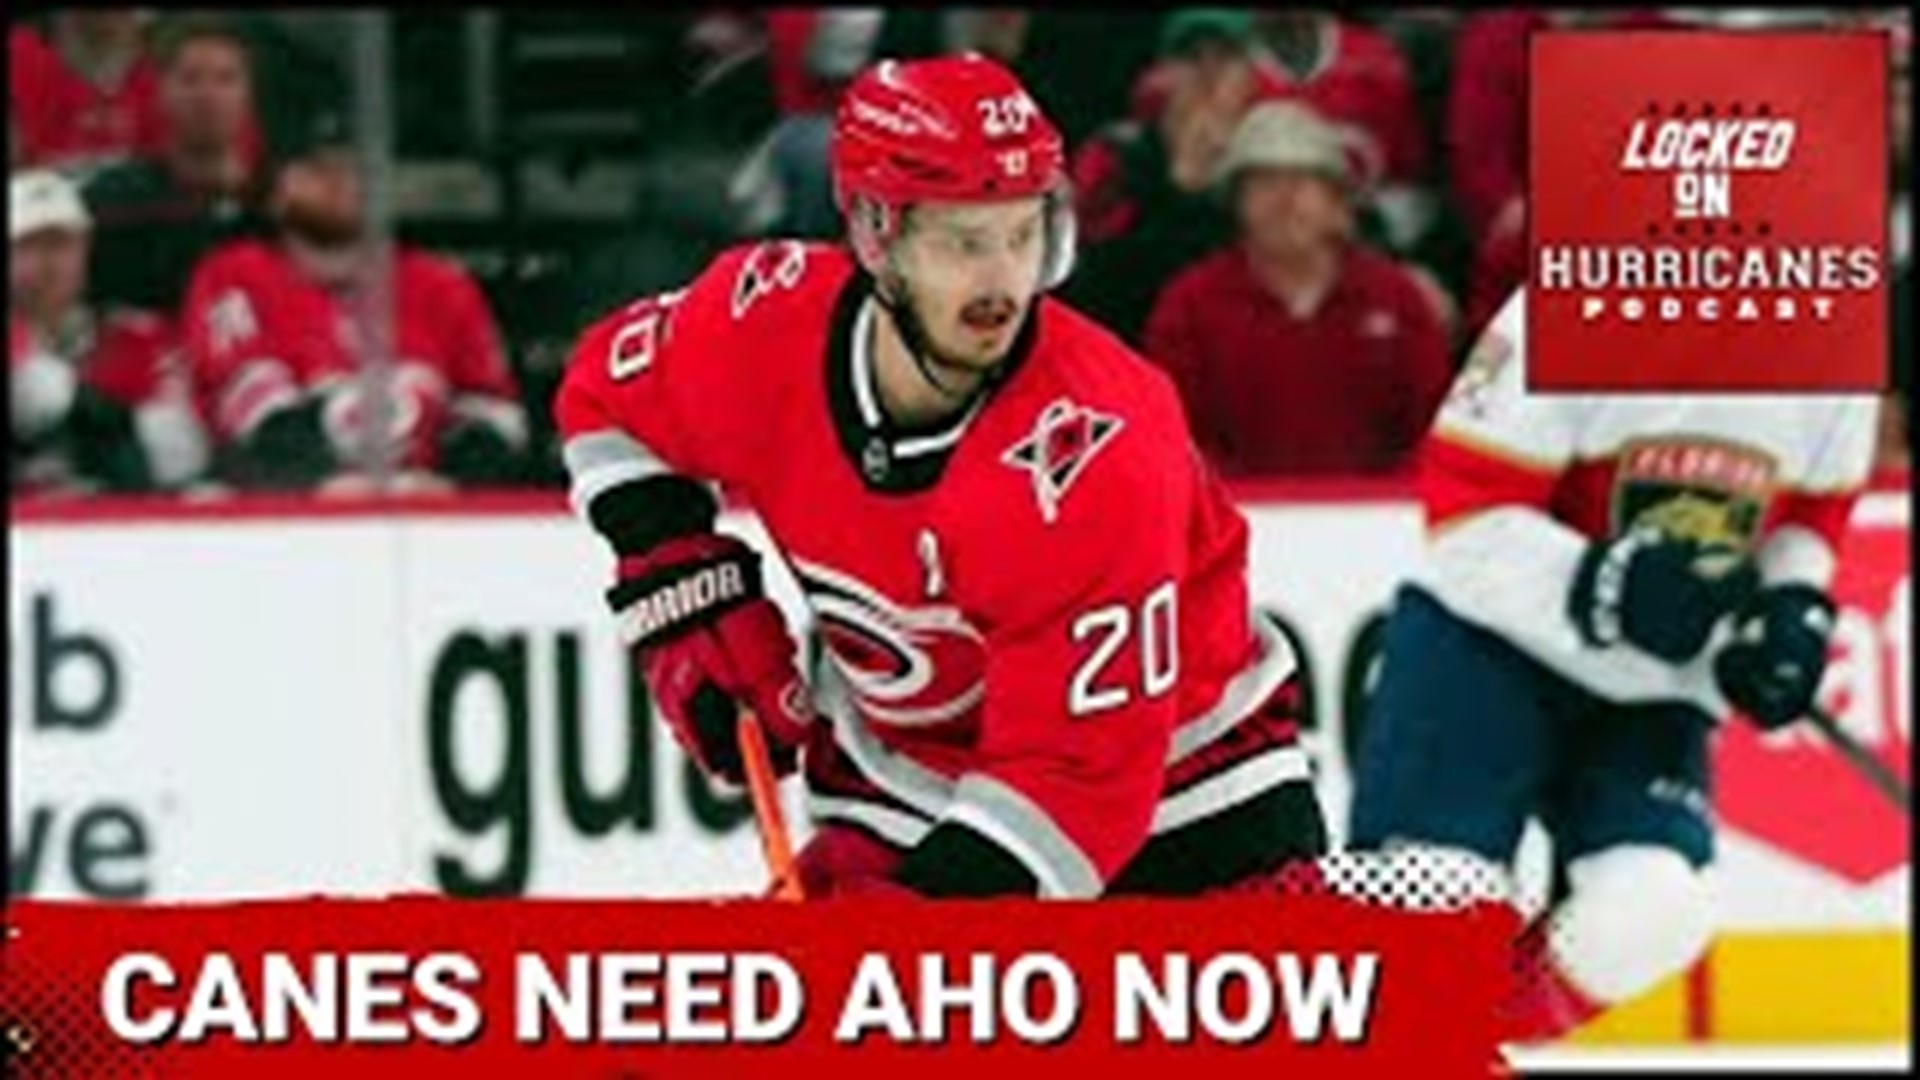 The Canes are looking to avoid going down 3-0 in their Eastern Conference Final series against the Florida Panthers. That and more on Locked On Hurricanes.